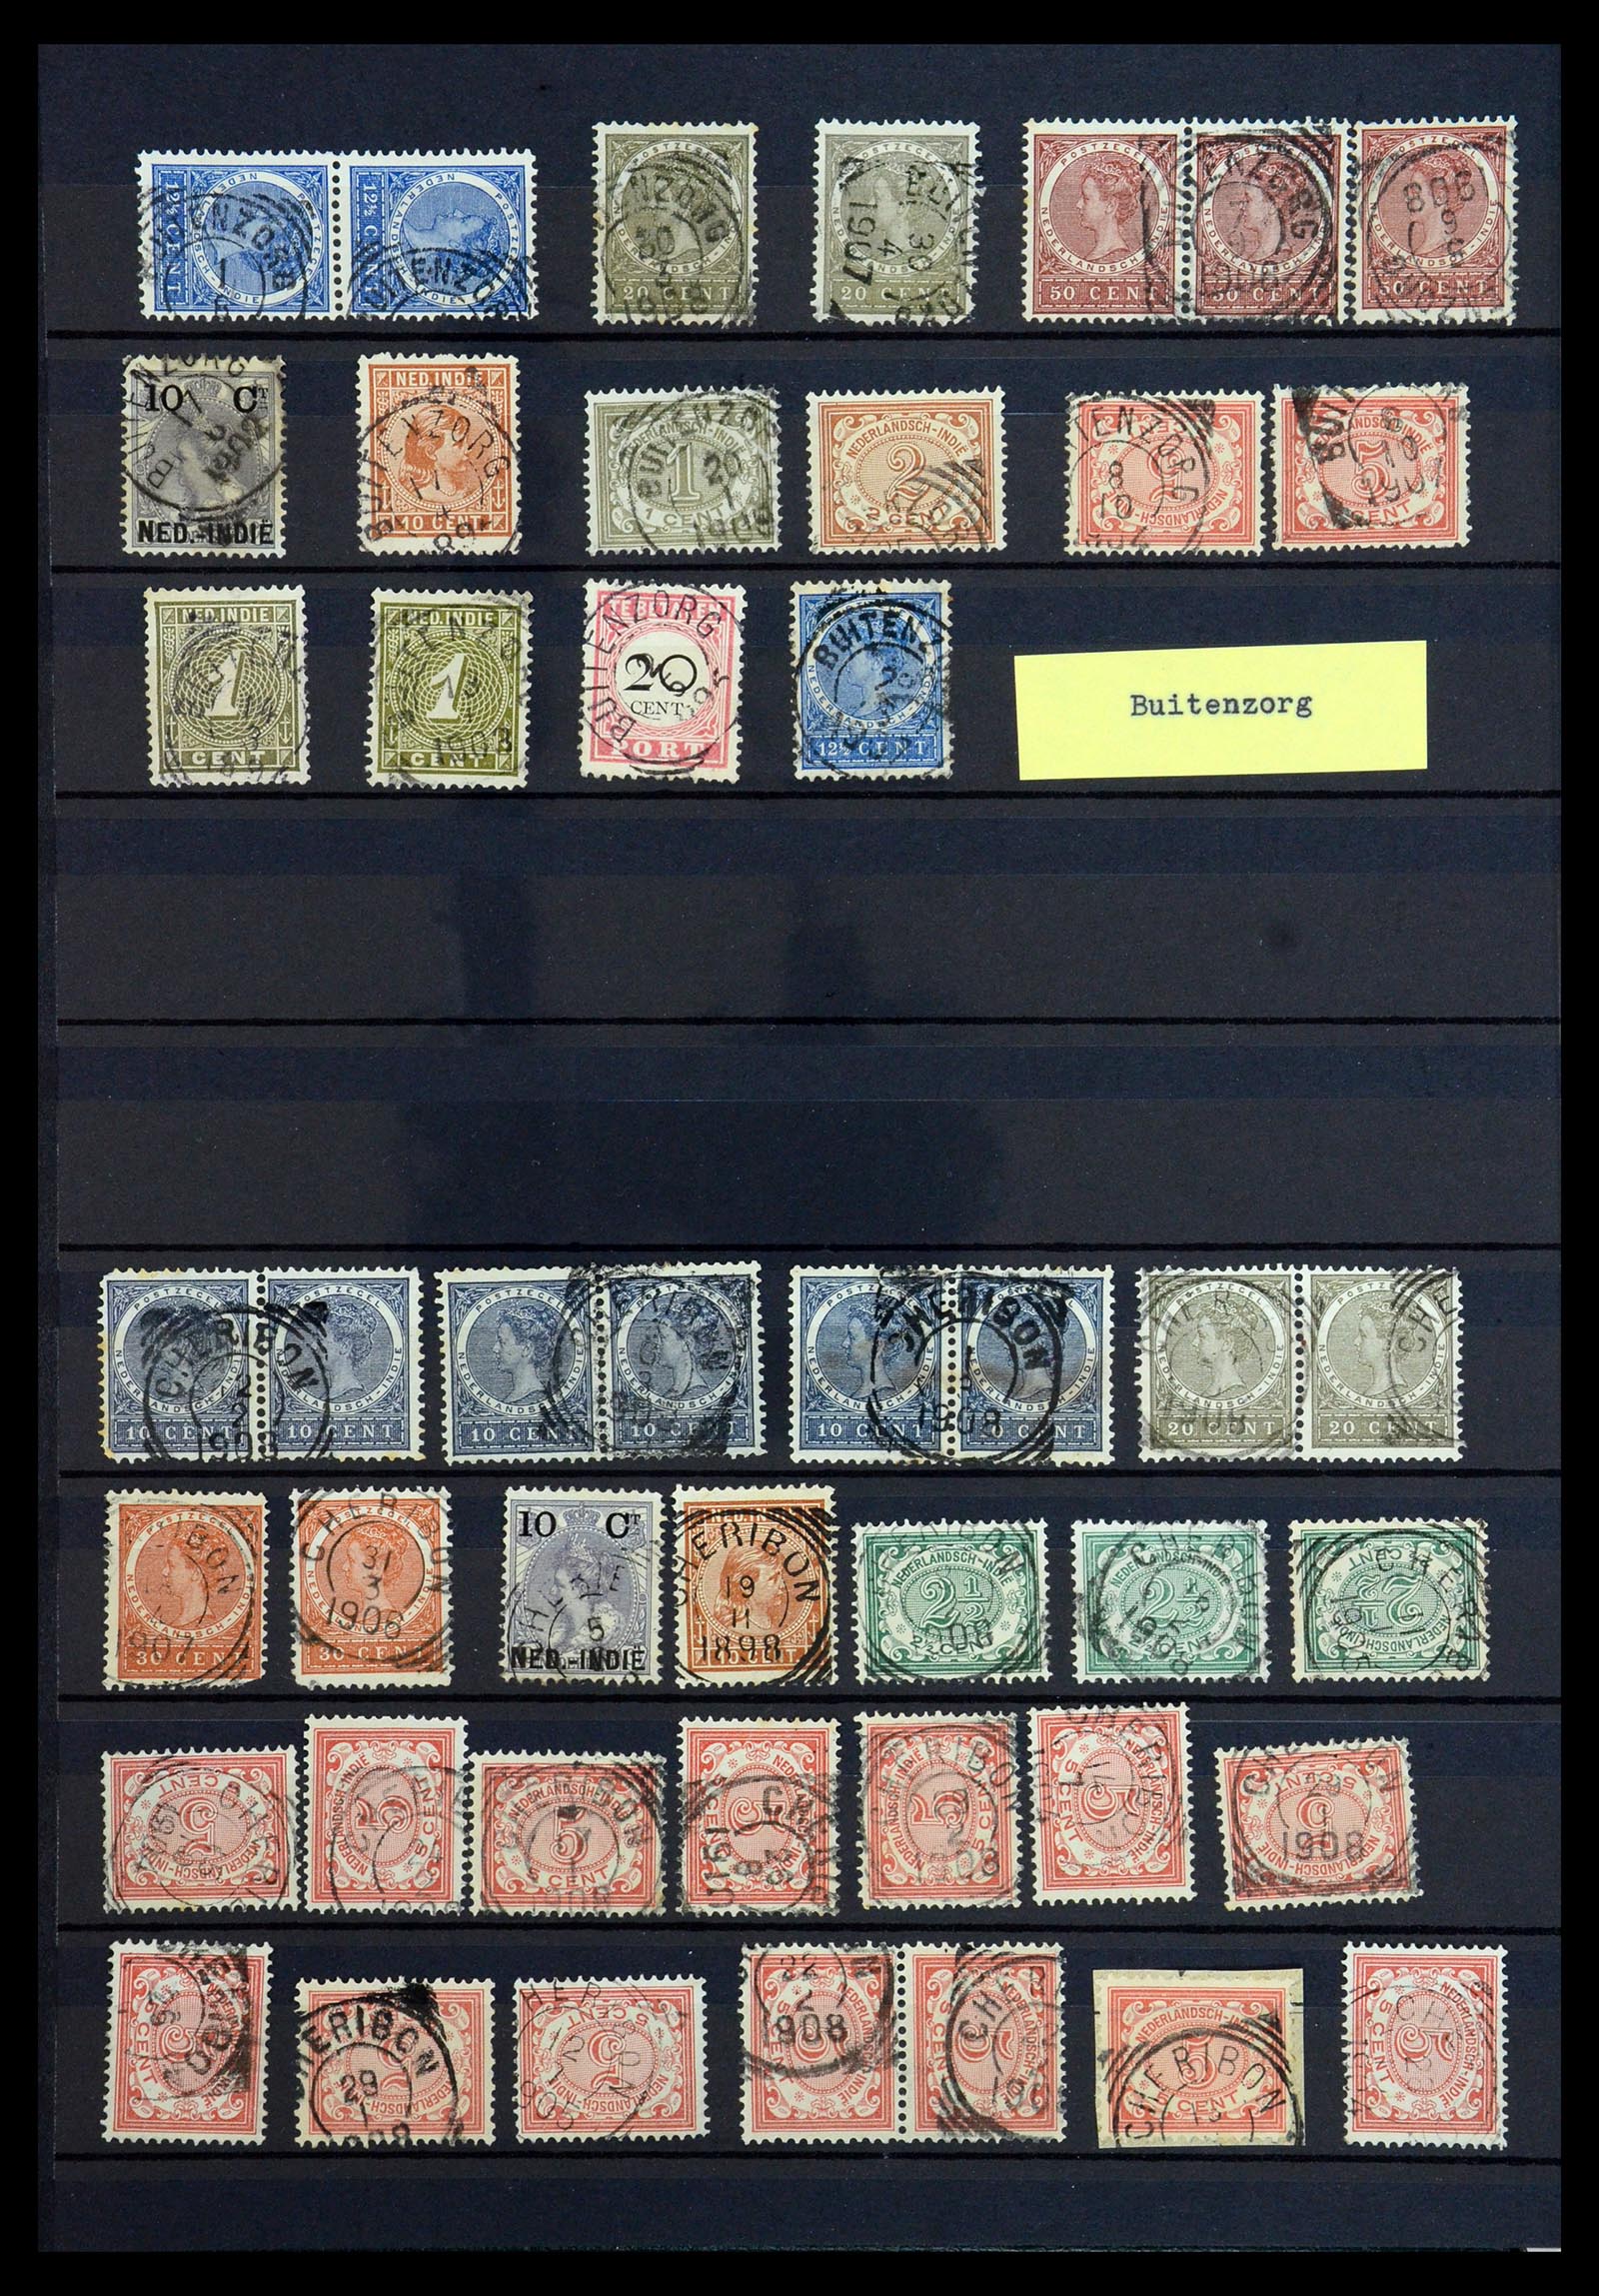 36371 012 - Stamp collection 36371 Dutch east Indies cancels.